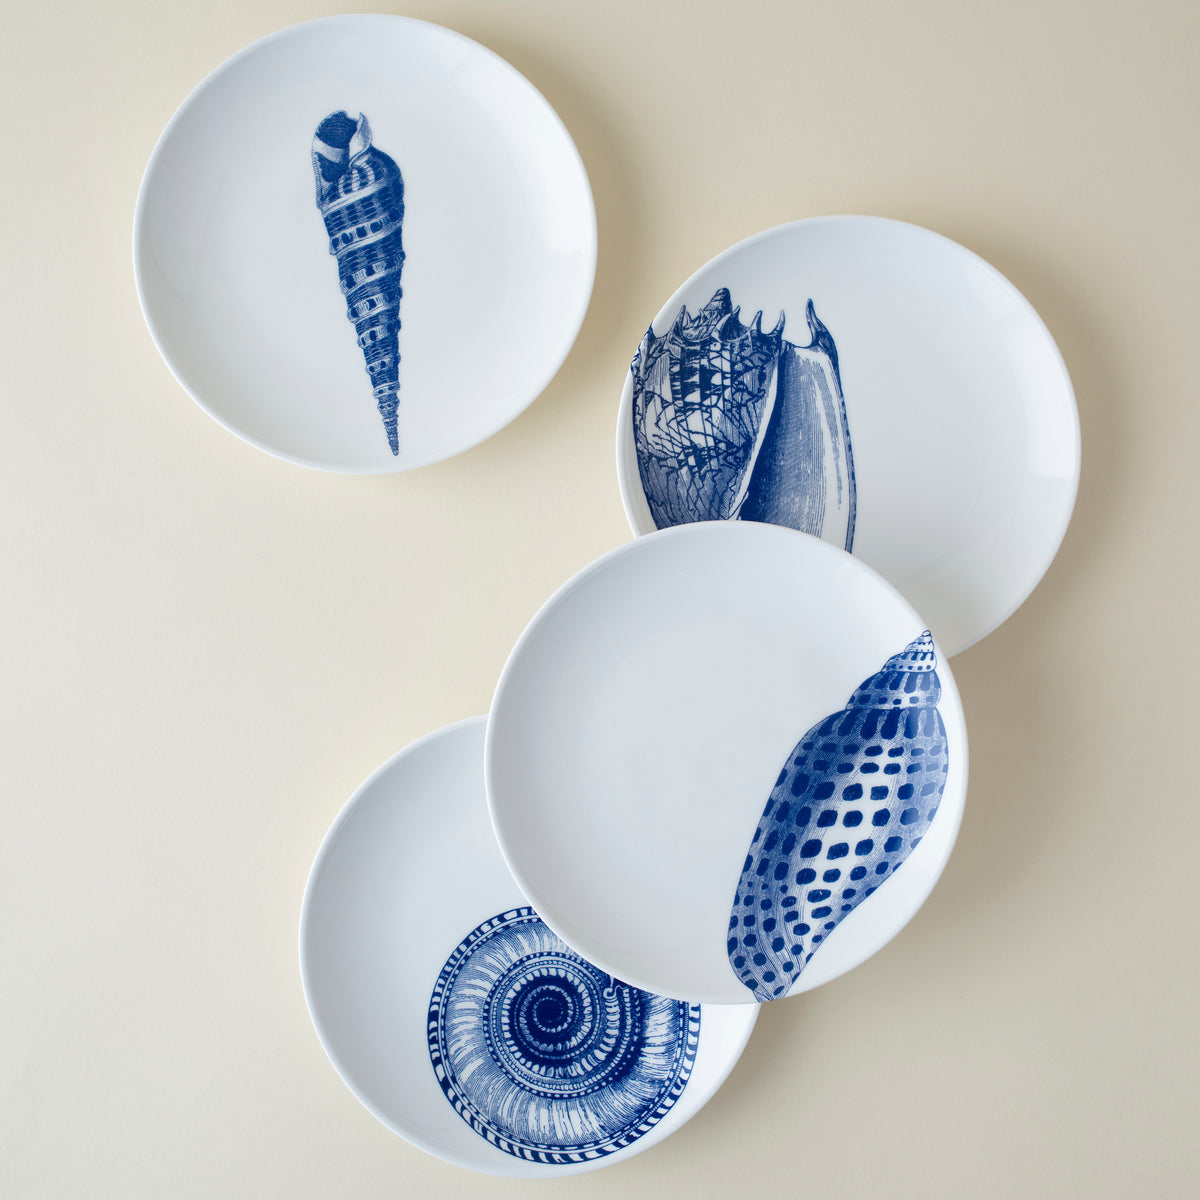 Four heirloom-quality Shells Small Plates by Caskata Artisanal Home featuring delicate blue sea shell illustrations are arranged in a loose circular formation on a light-colored surface, making them a stunning addition to your beach collection.